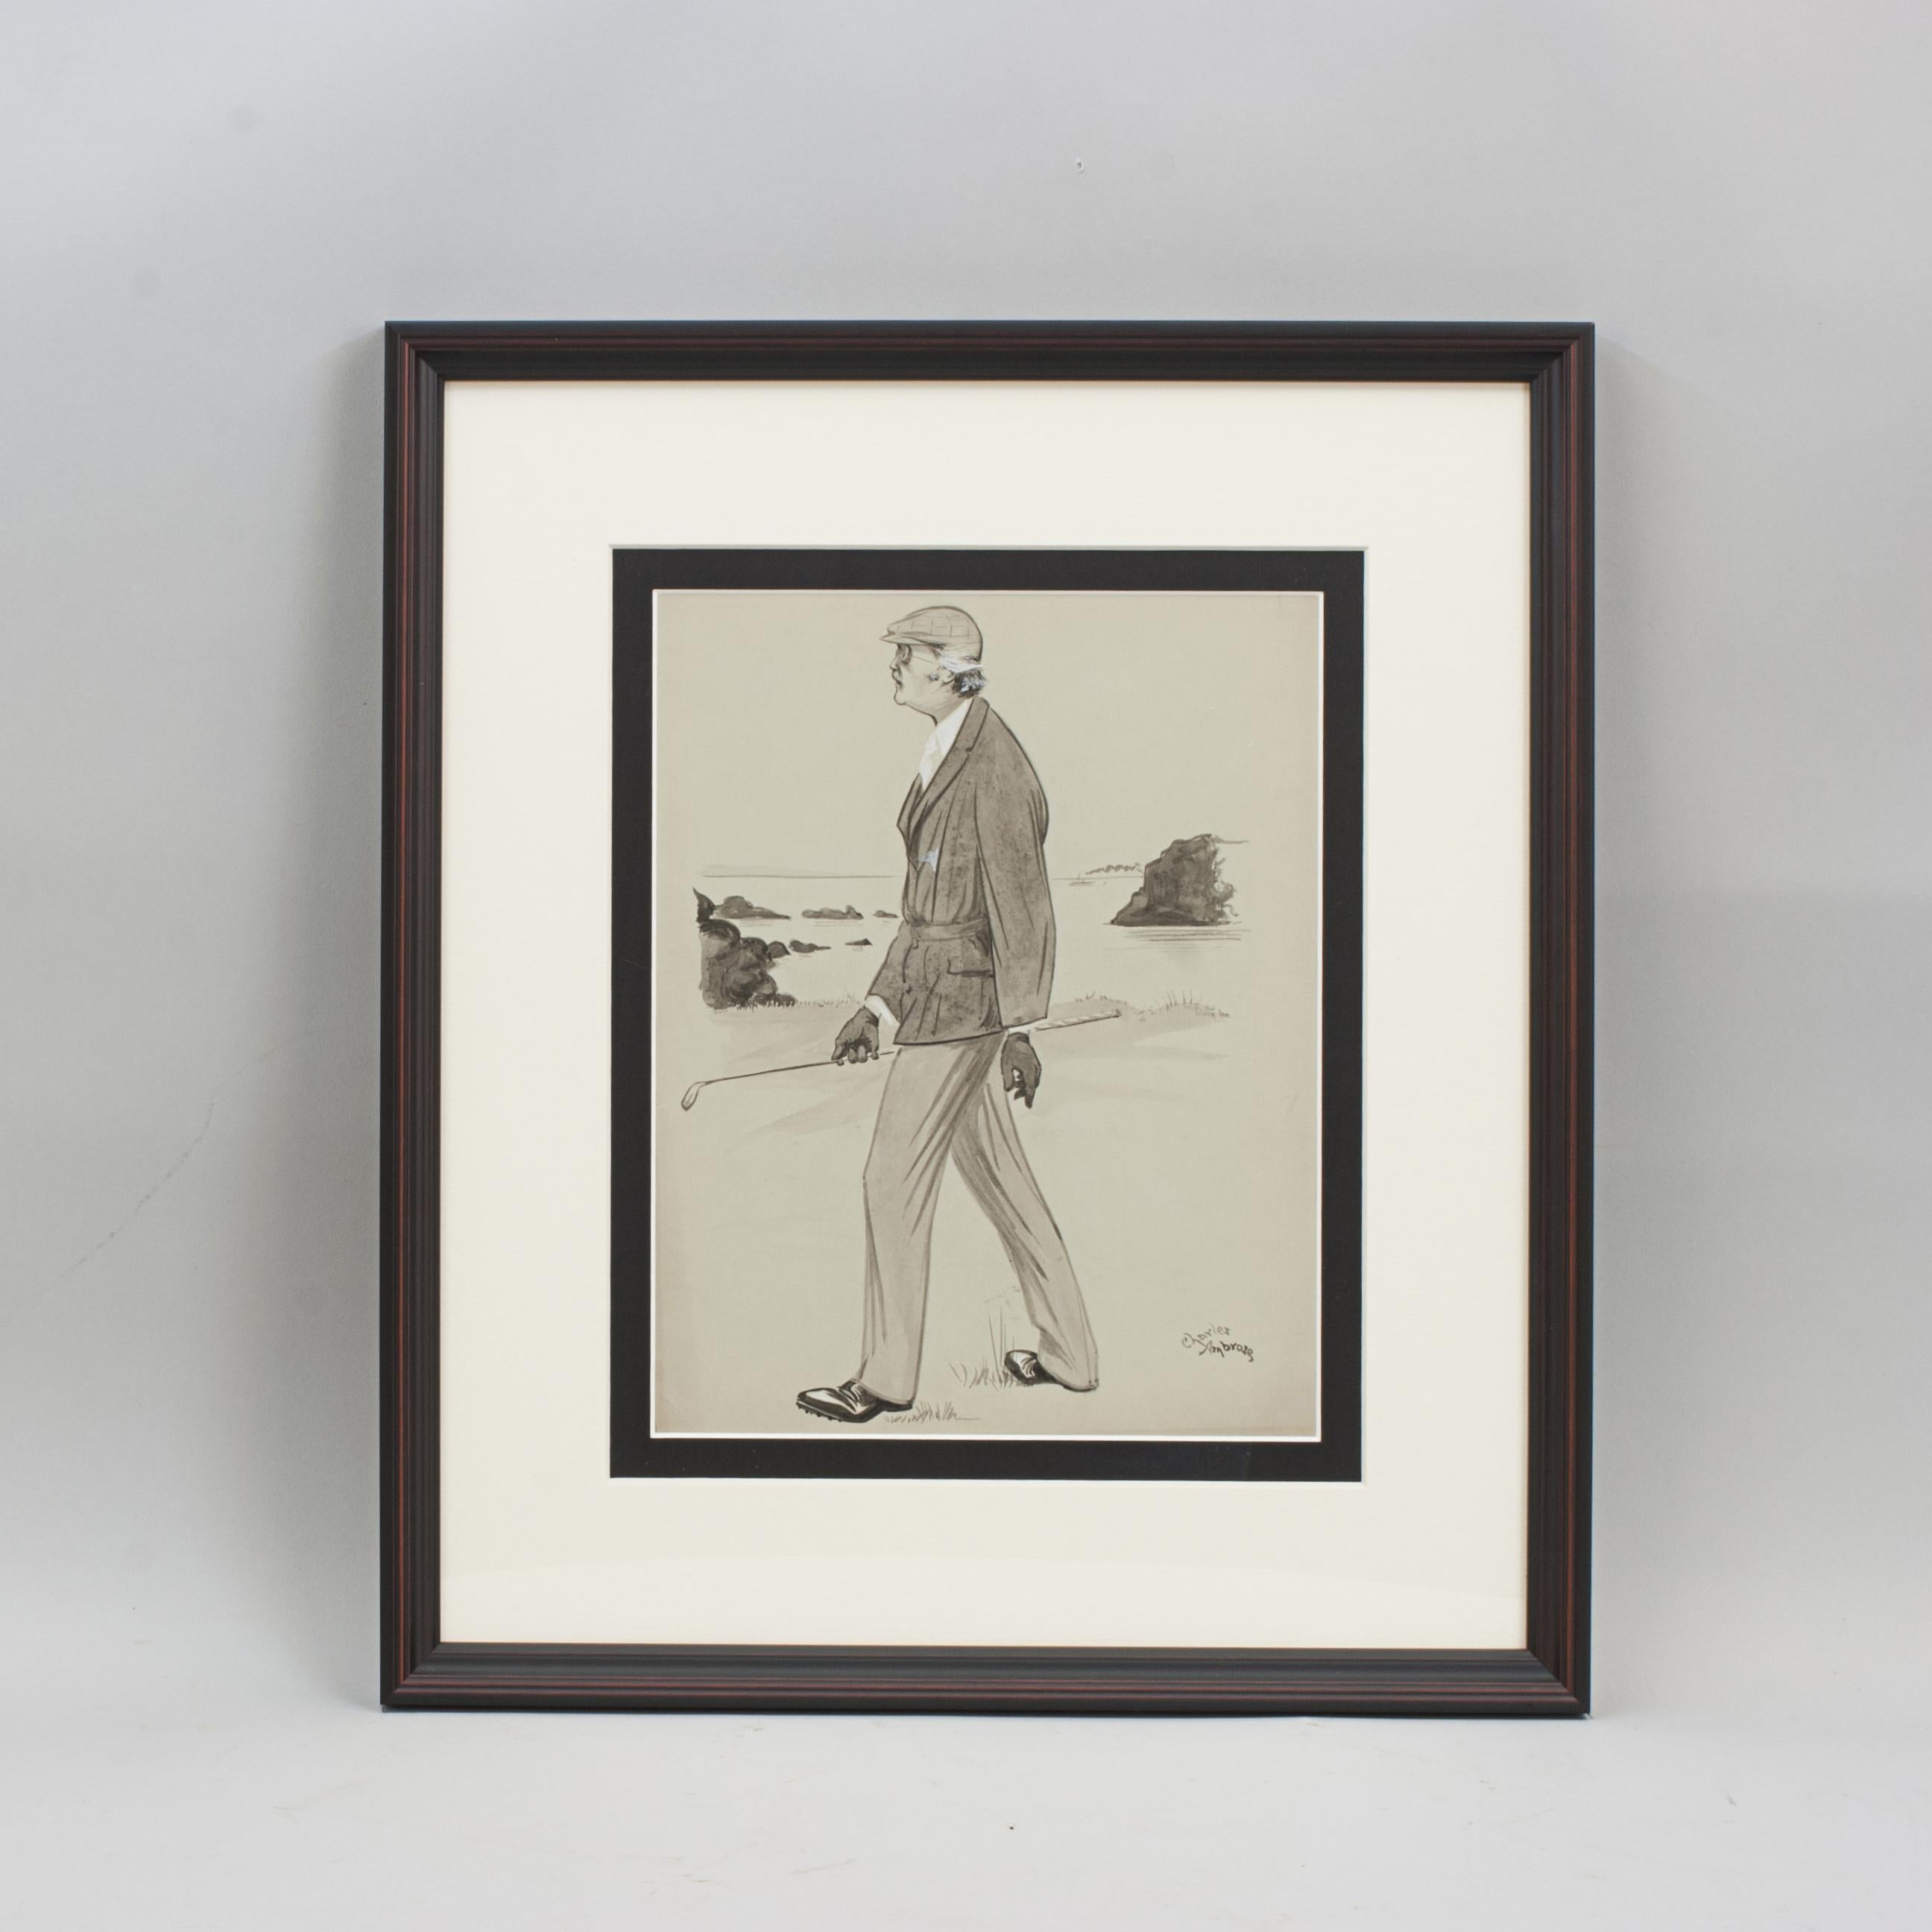 Golf watercolour painting by Charles Ambrose Of British Politician Arthur Balfour.
Original watercolor en grisaille on board of Arthur Balfour in golfing attire, by Charles Ambrose. Ambrose was a notable portrait painter of famous figures including